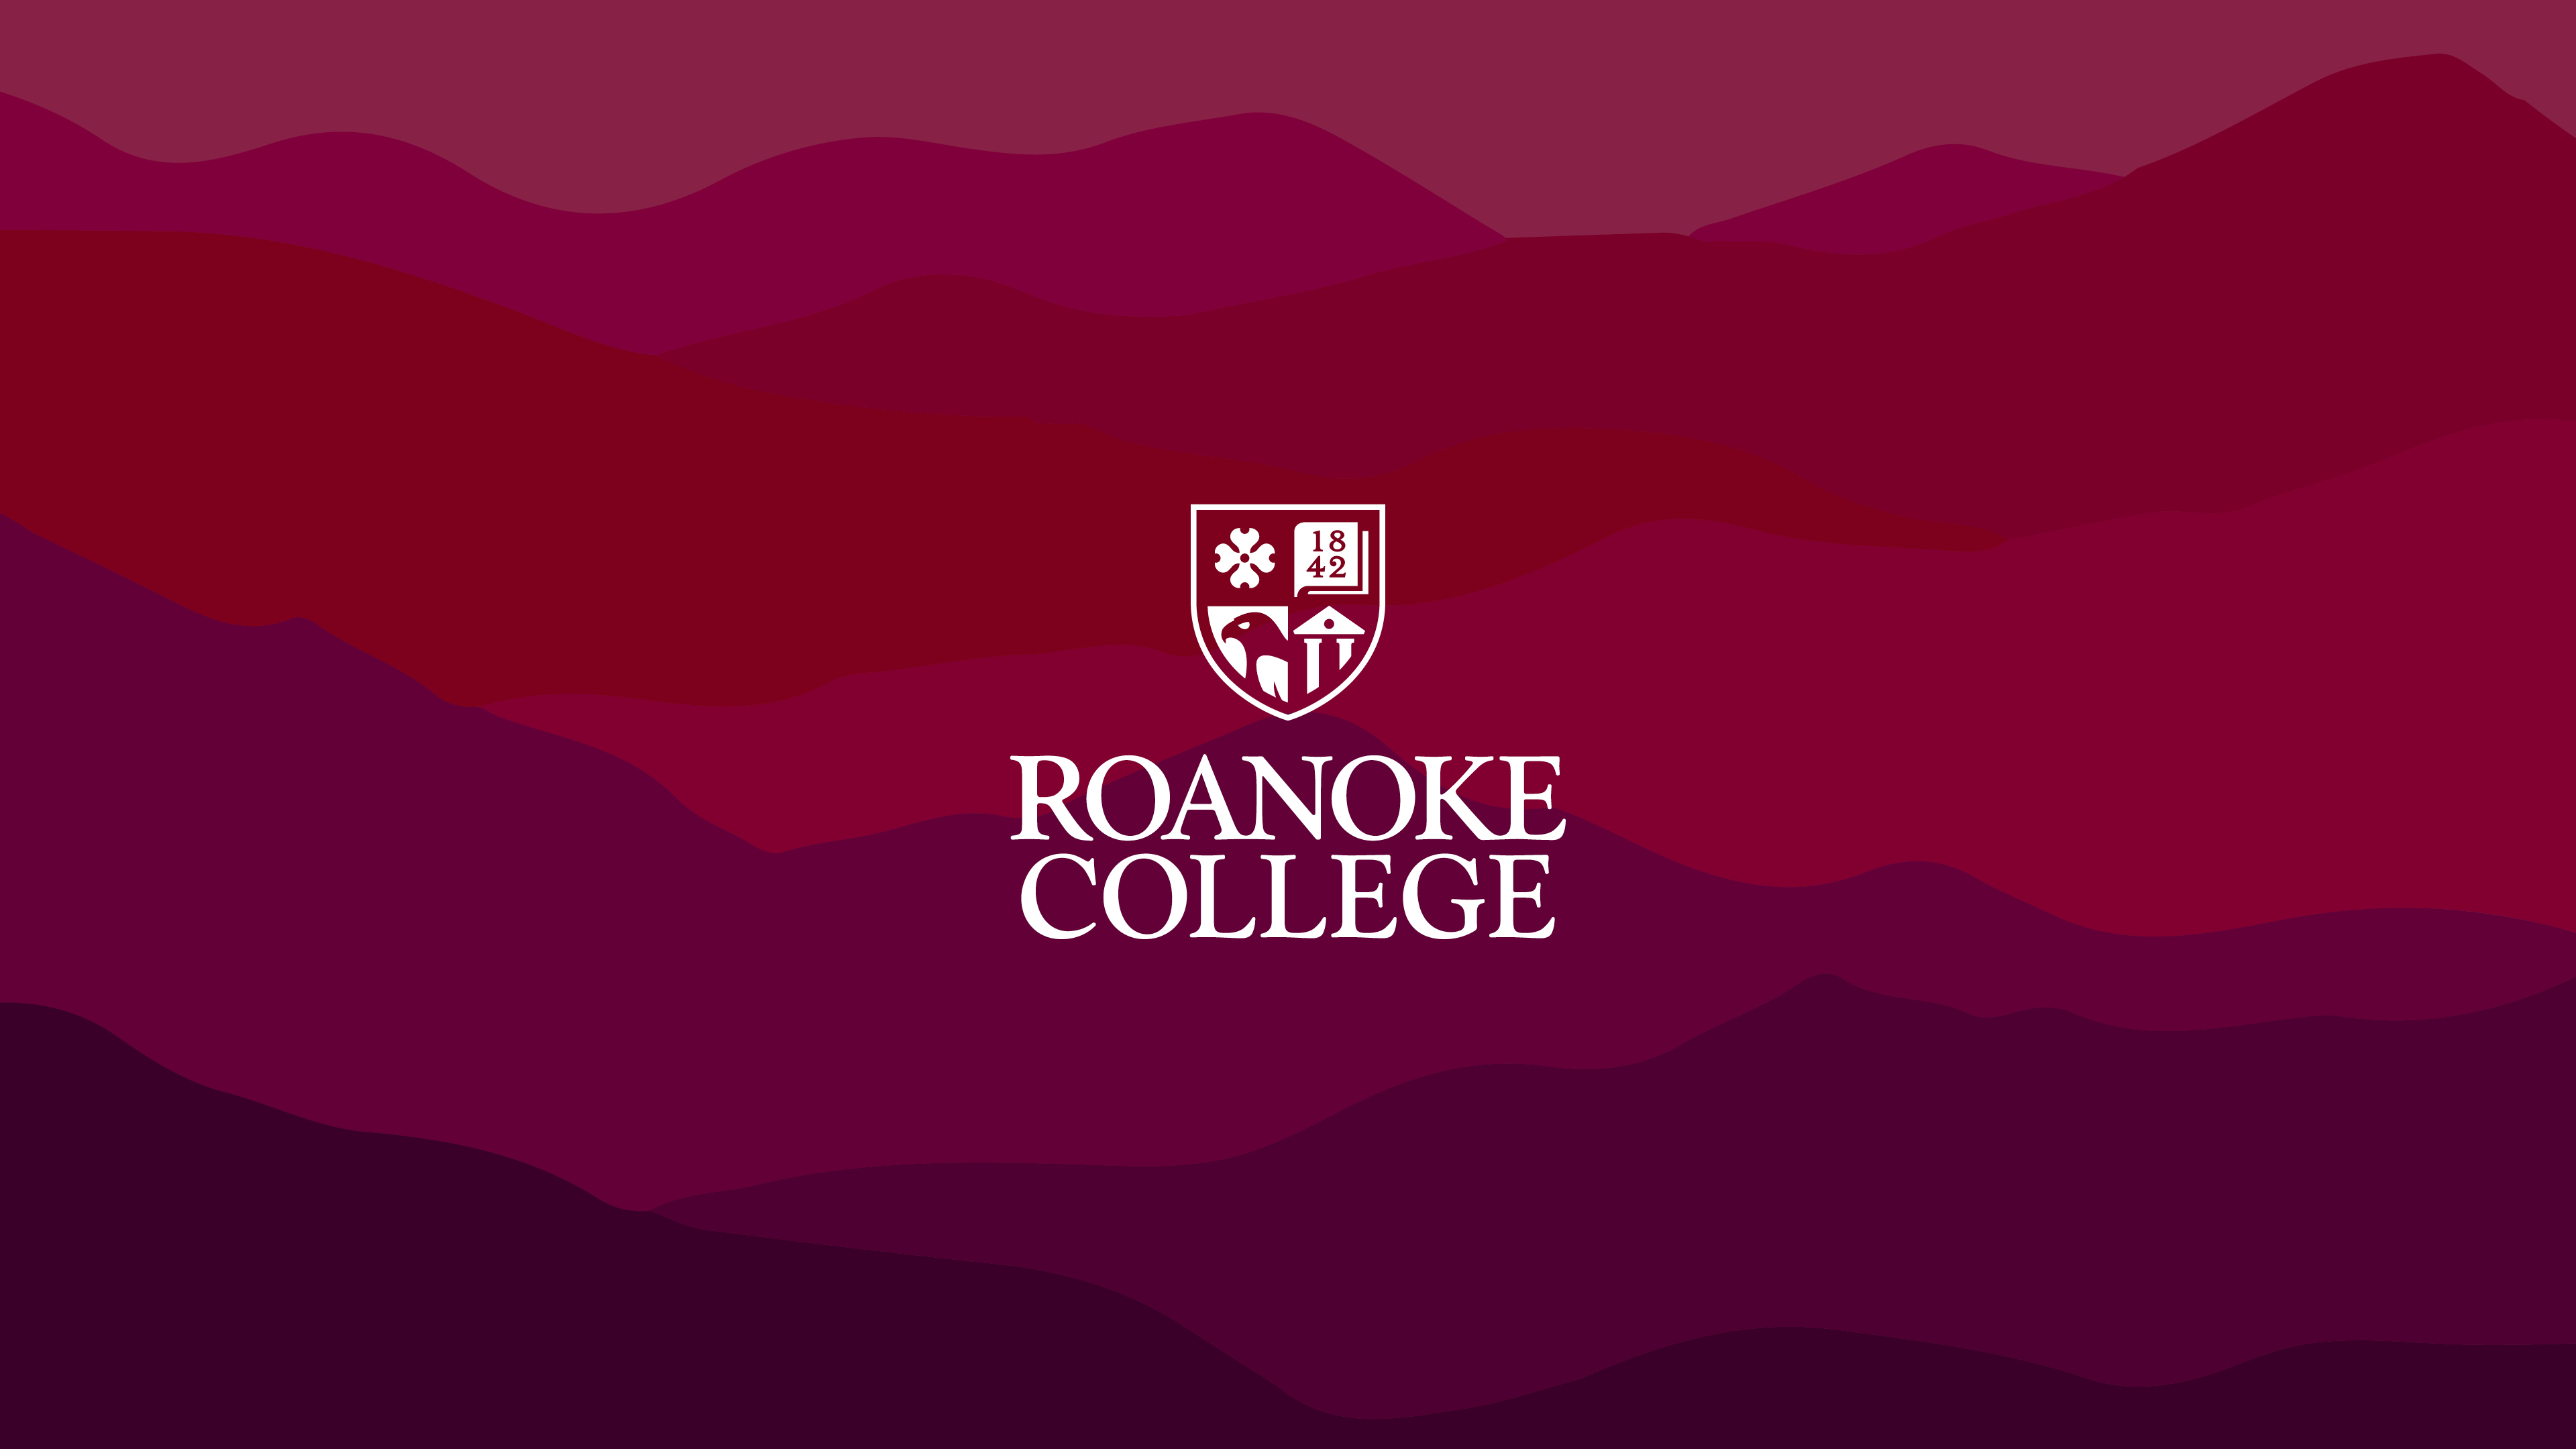 mountains with Roanoke College logo